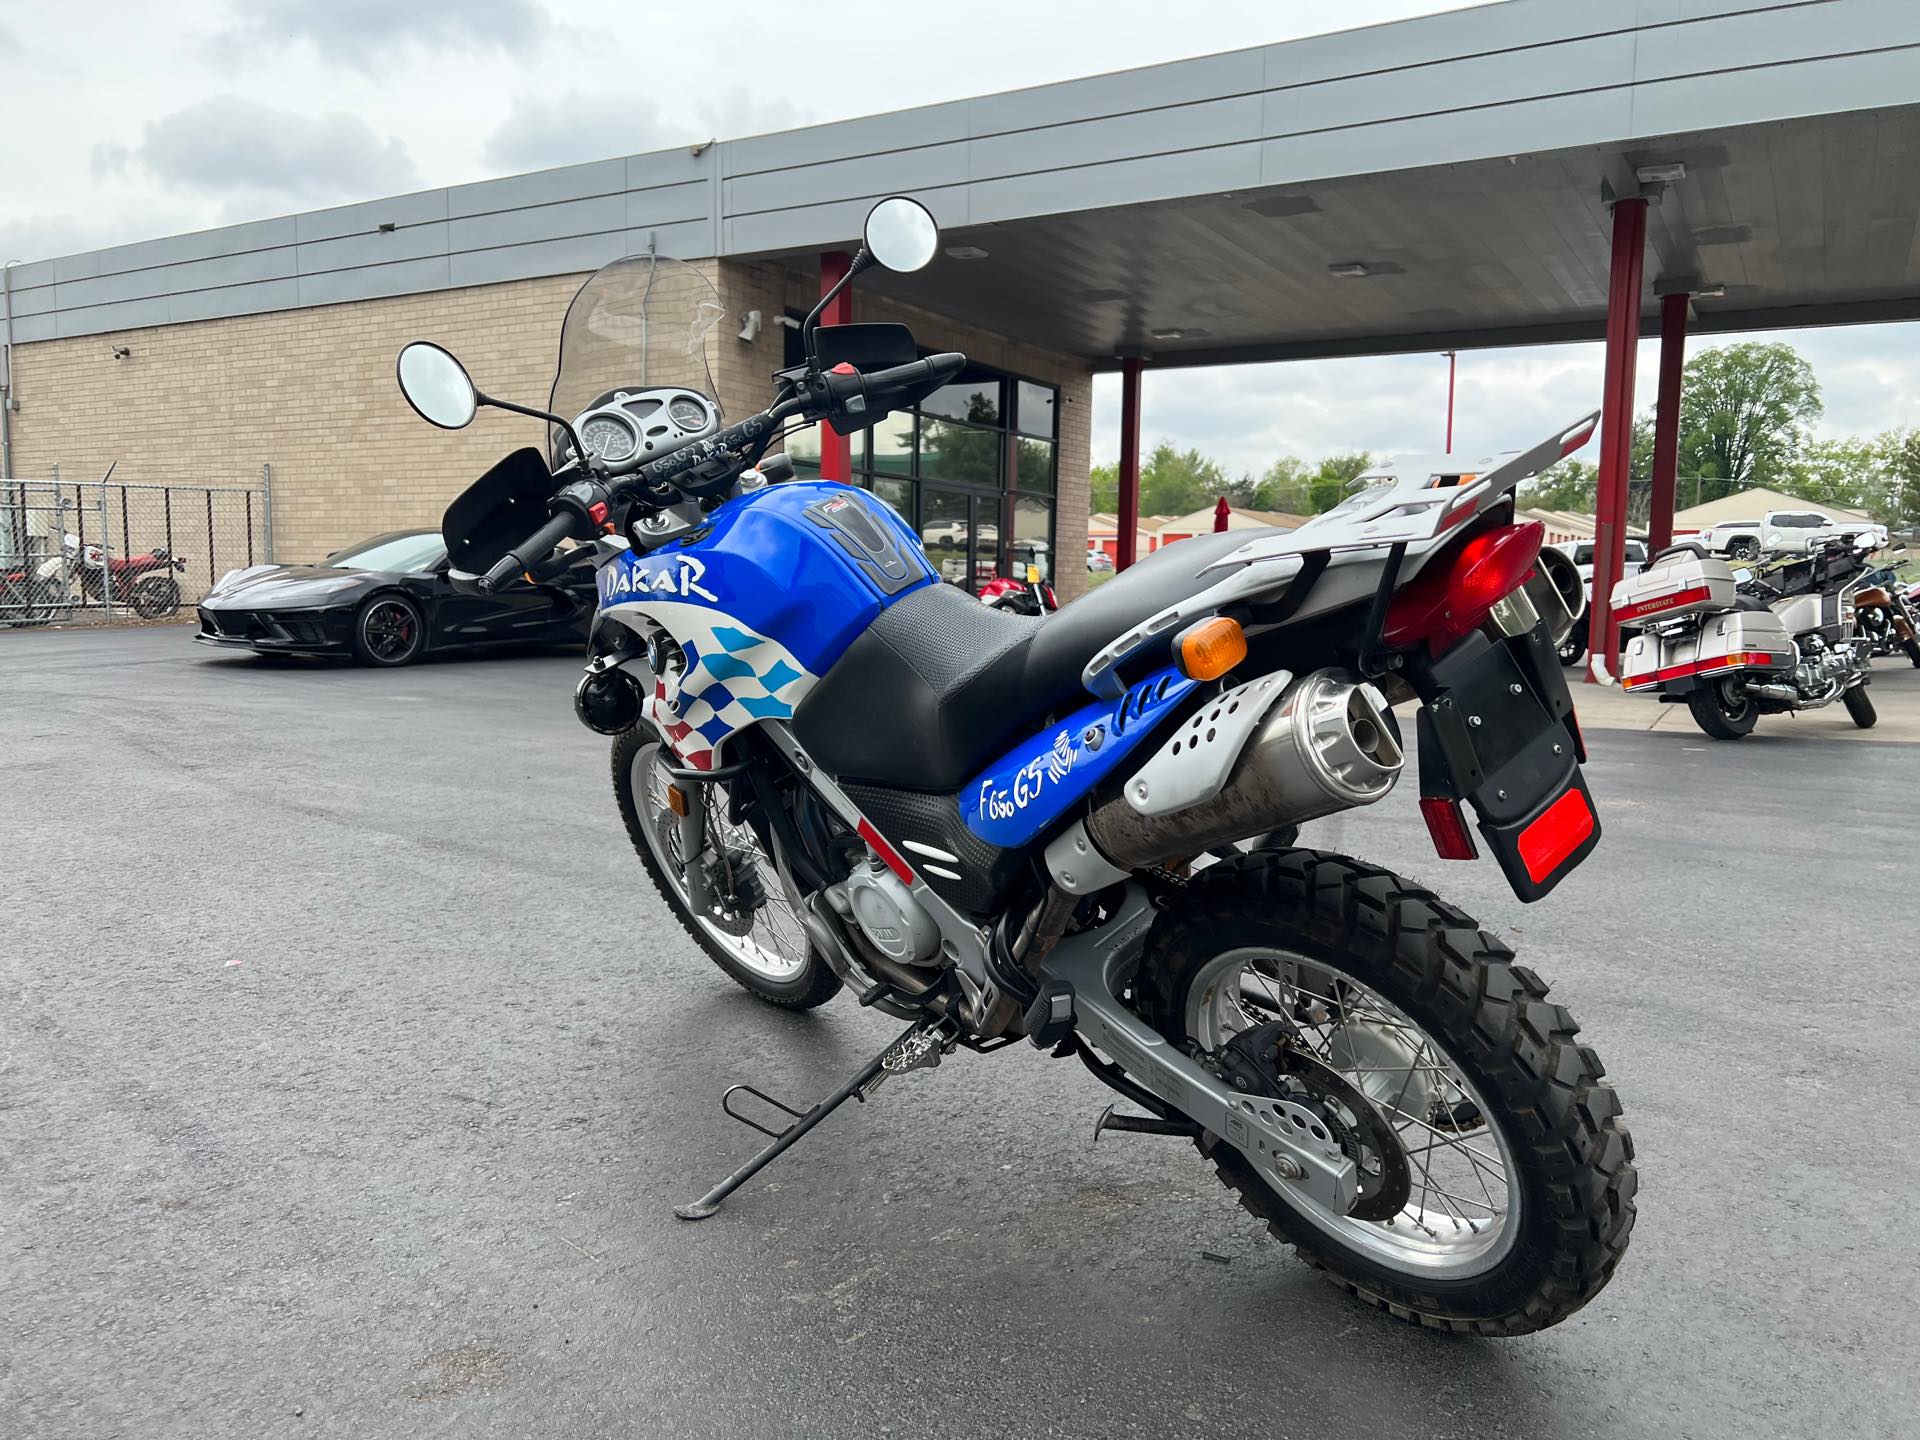 2003 BMW F650GS DAKAR at Aces Motorcycles - Fort Collins